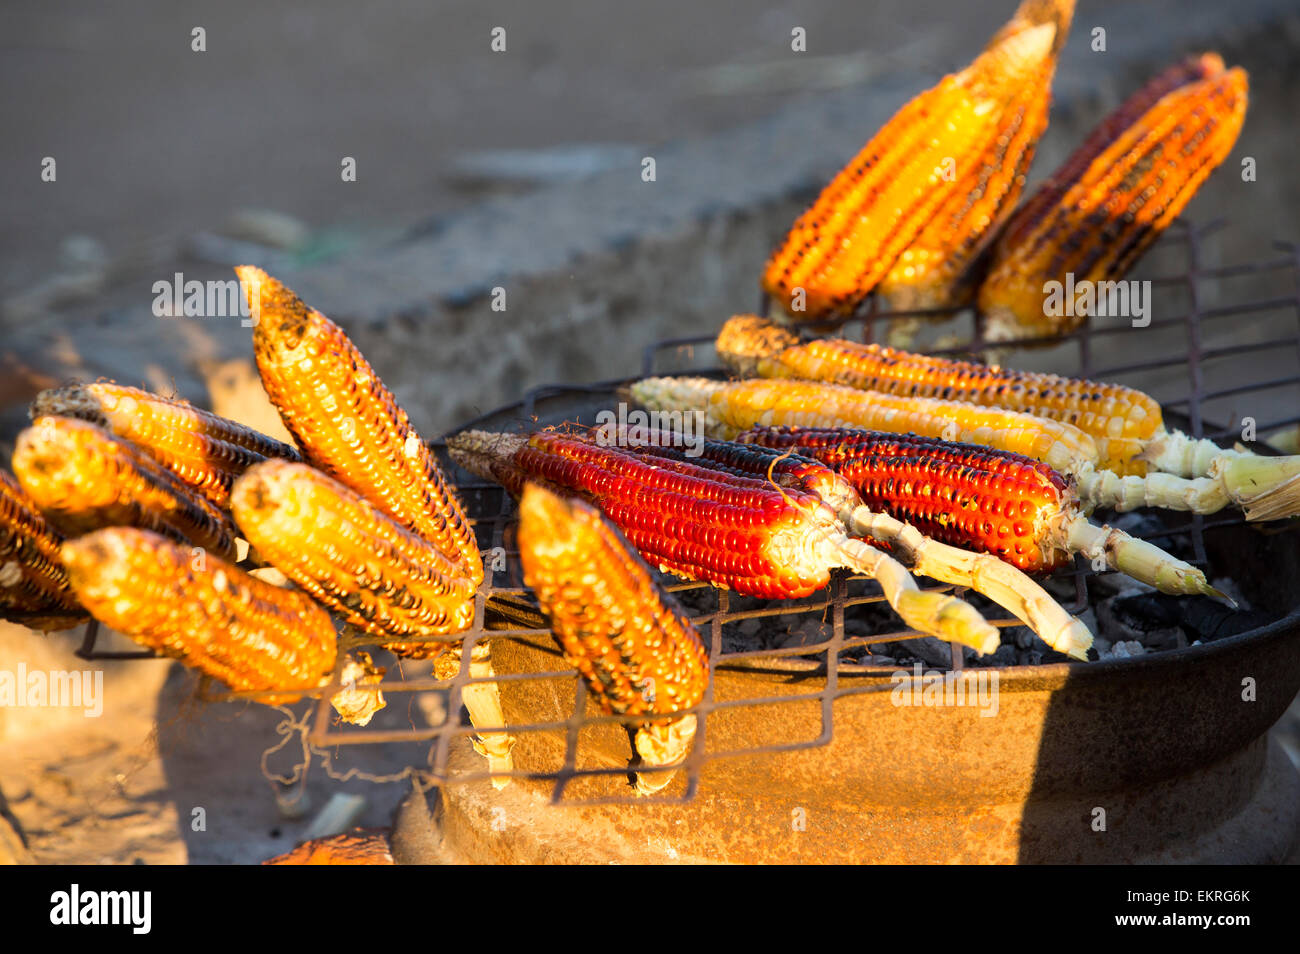 Maize, the staple diet of Malawi being grilled at an African market on the roadside in Ckiwawa, Malawi, Africa. Stock Photo